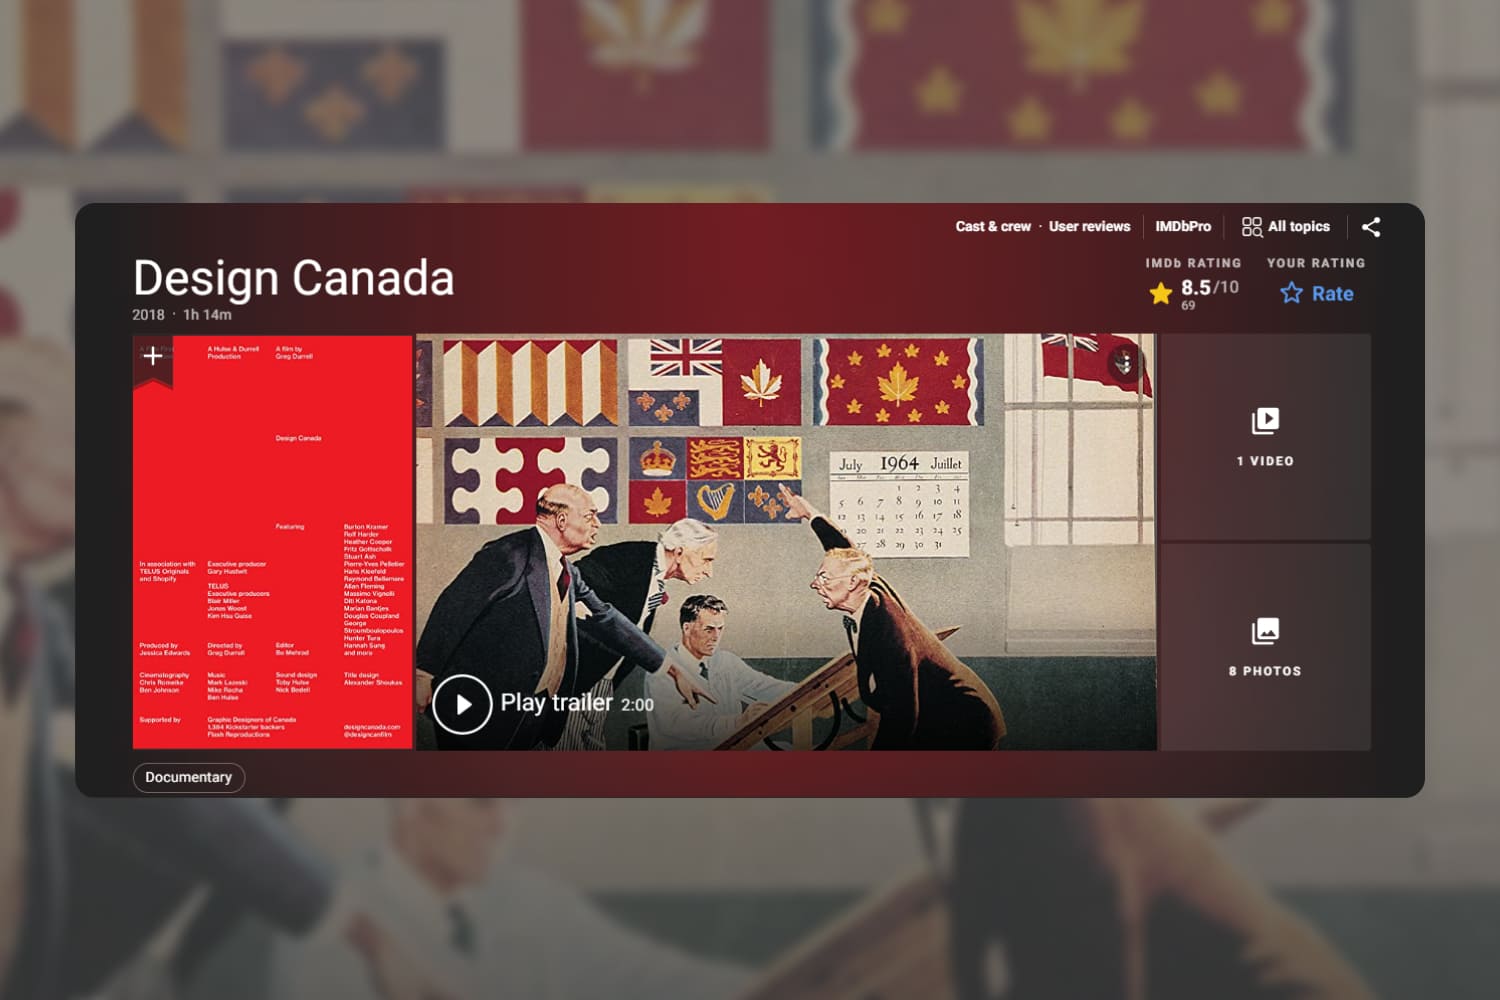 Screenshot of the page of the series Design Canada on the IMDB website.